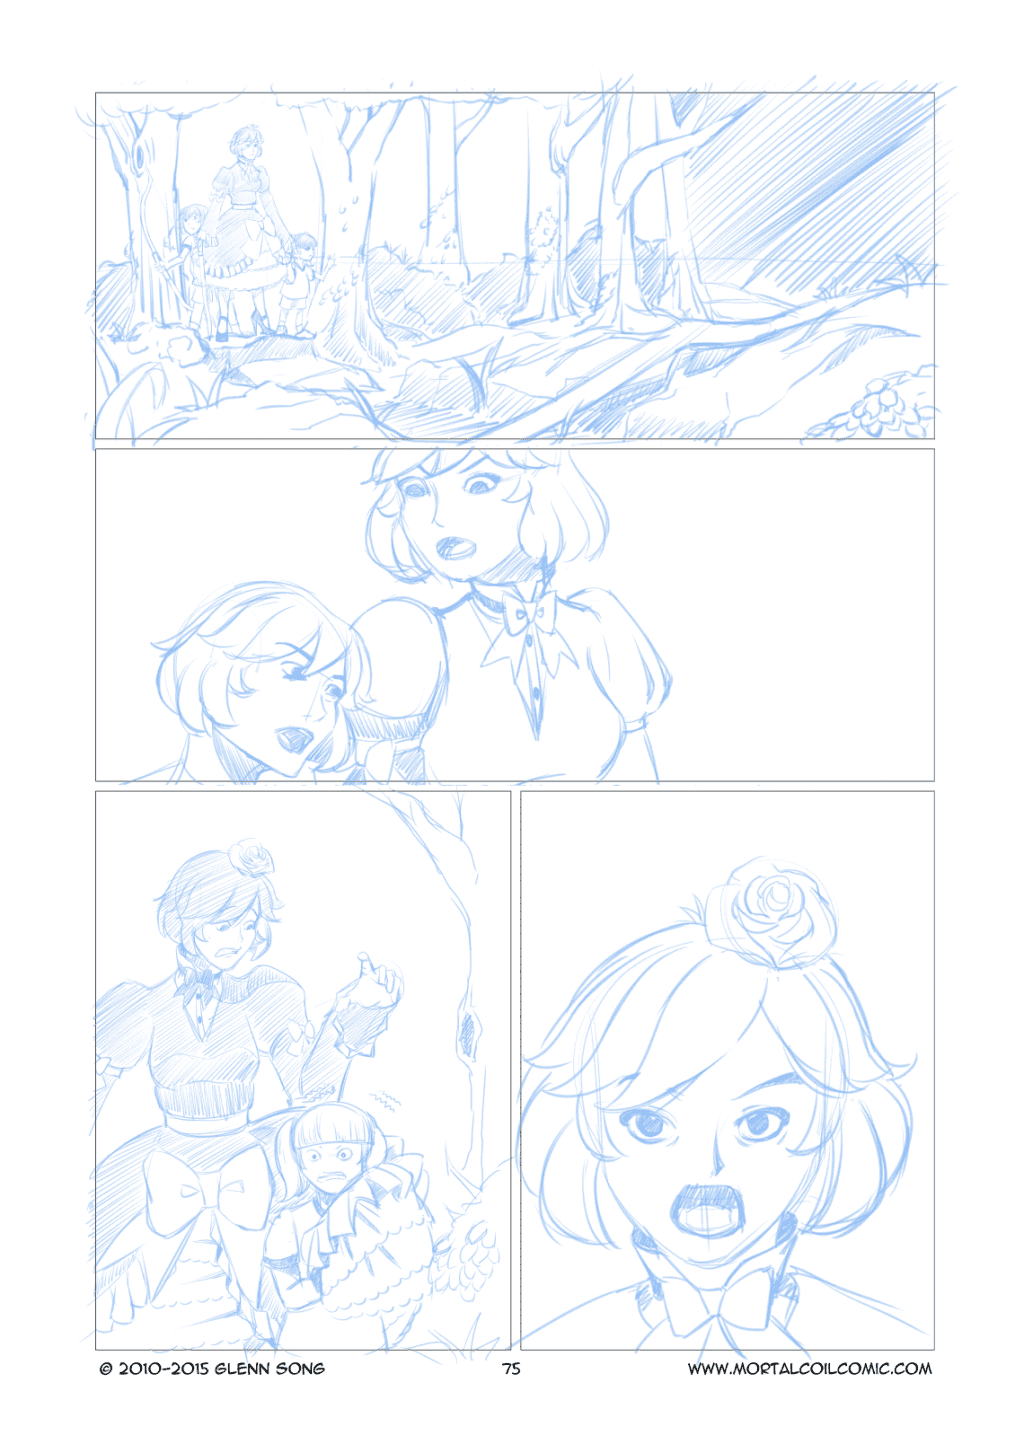 Archer of the West - 6 Pencils